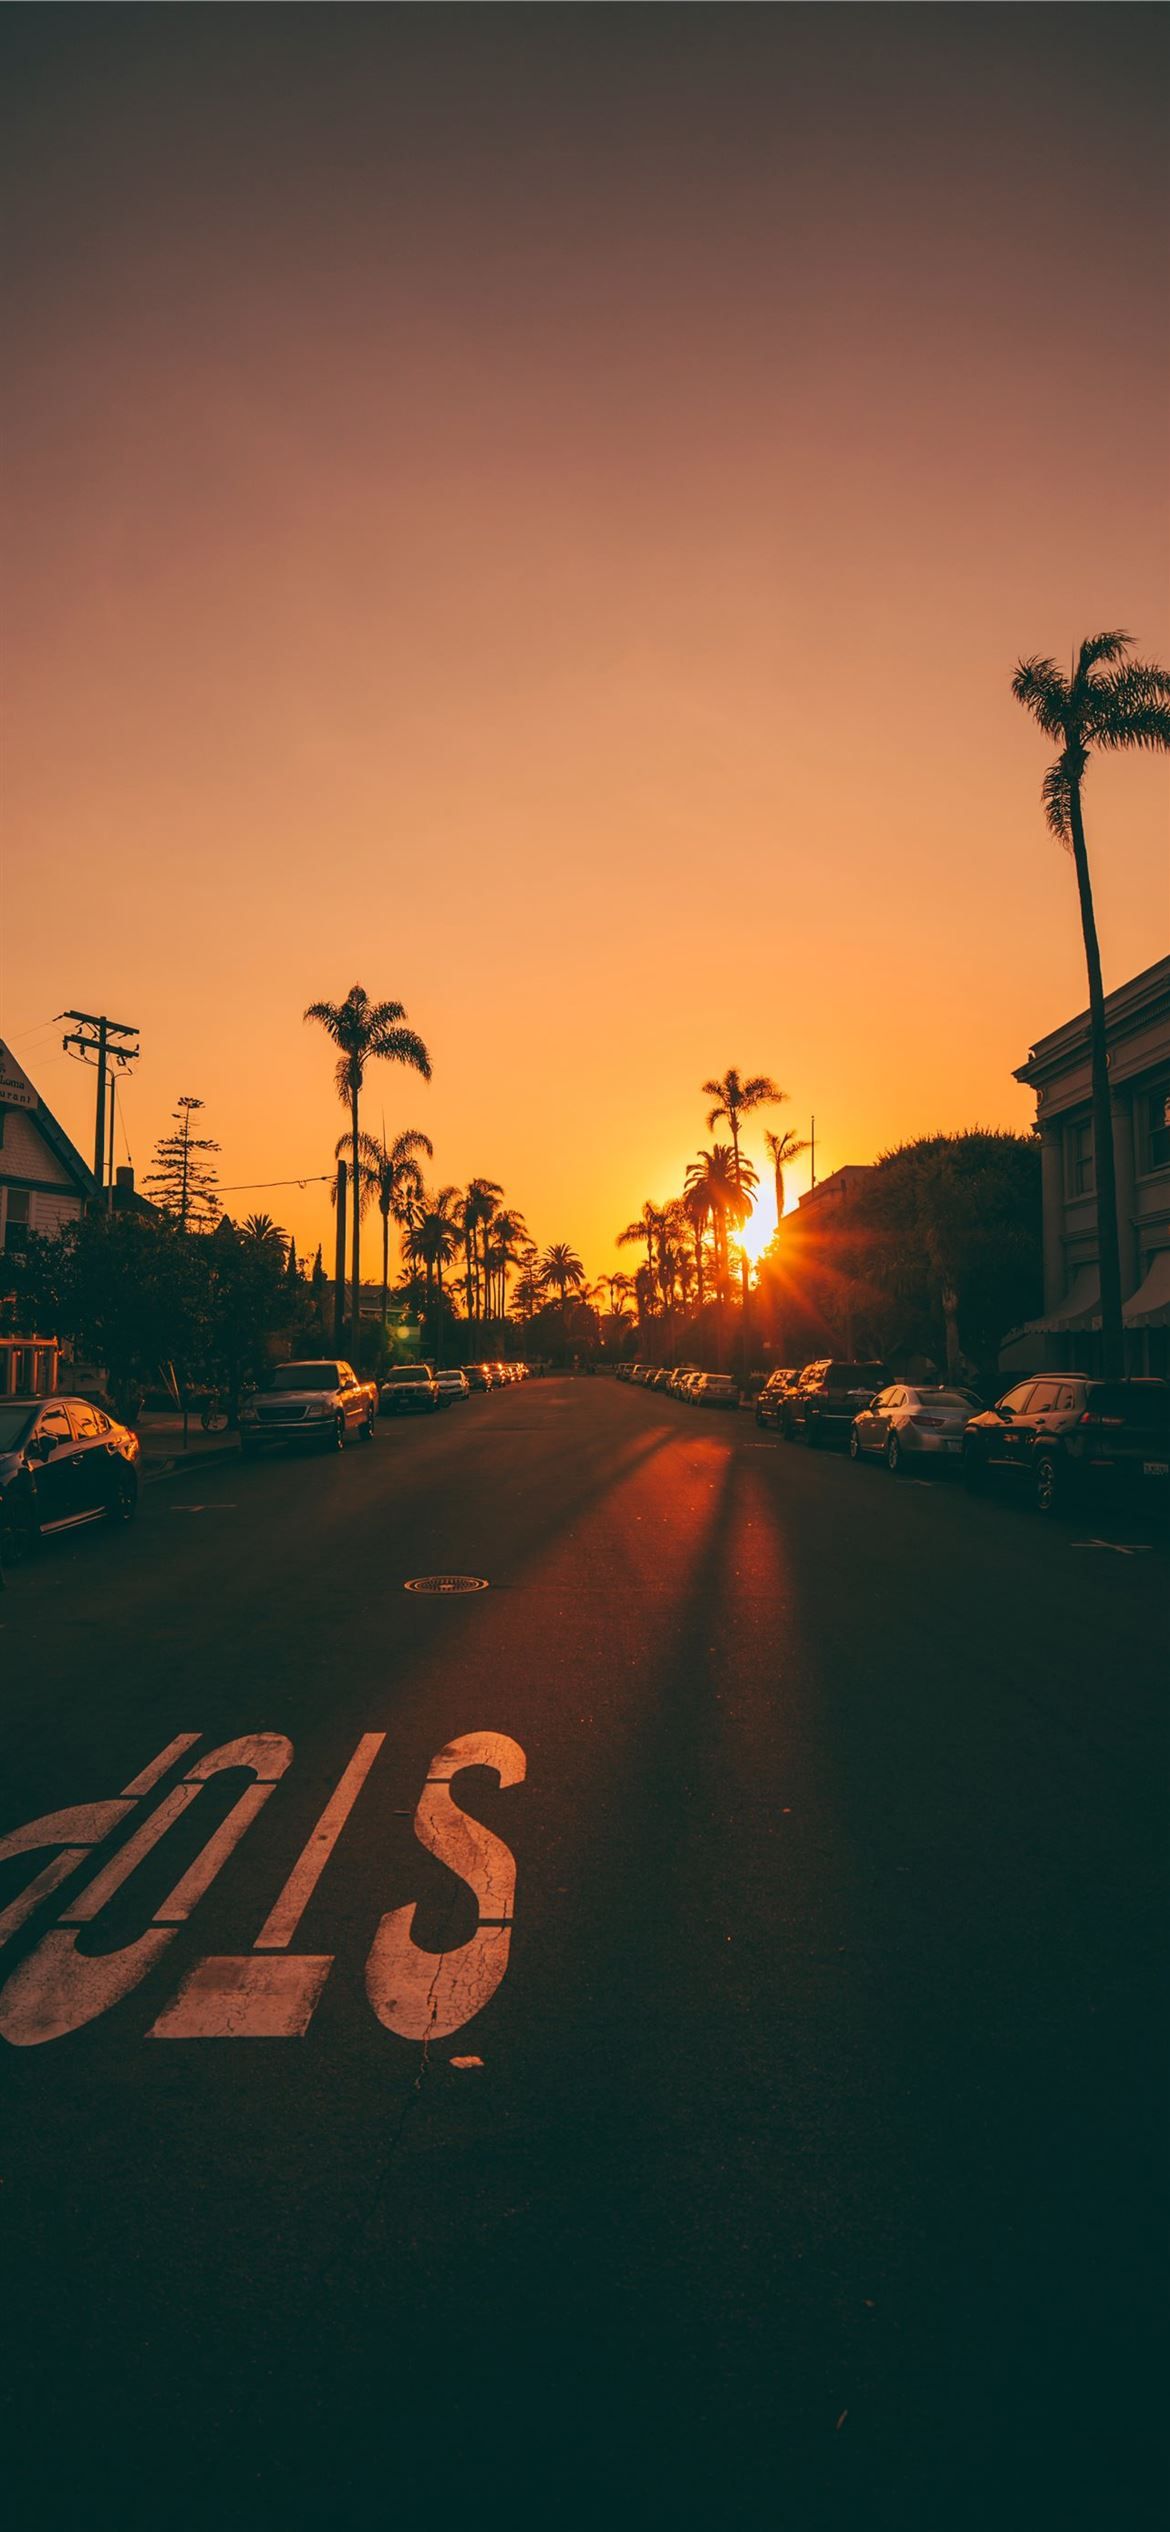 A sunset over a road with cars parked on the side - Sunset